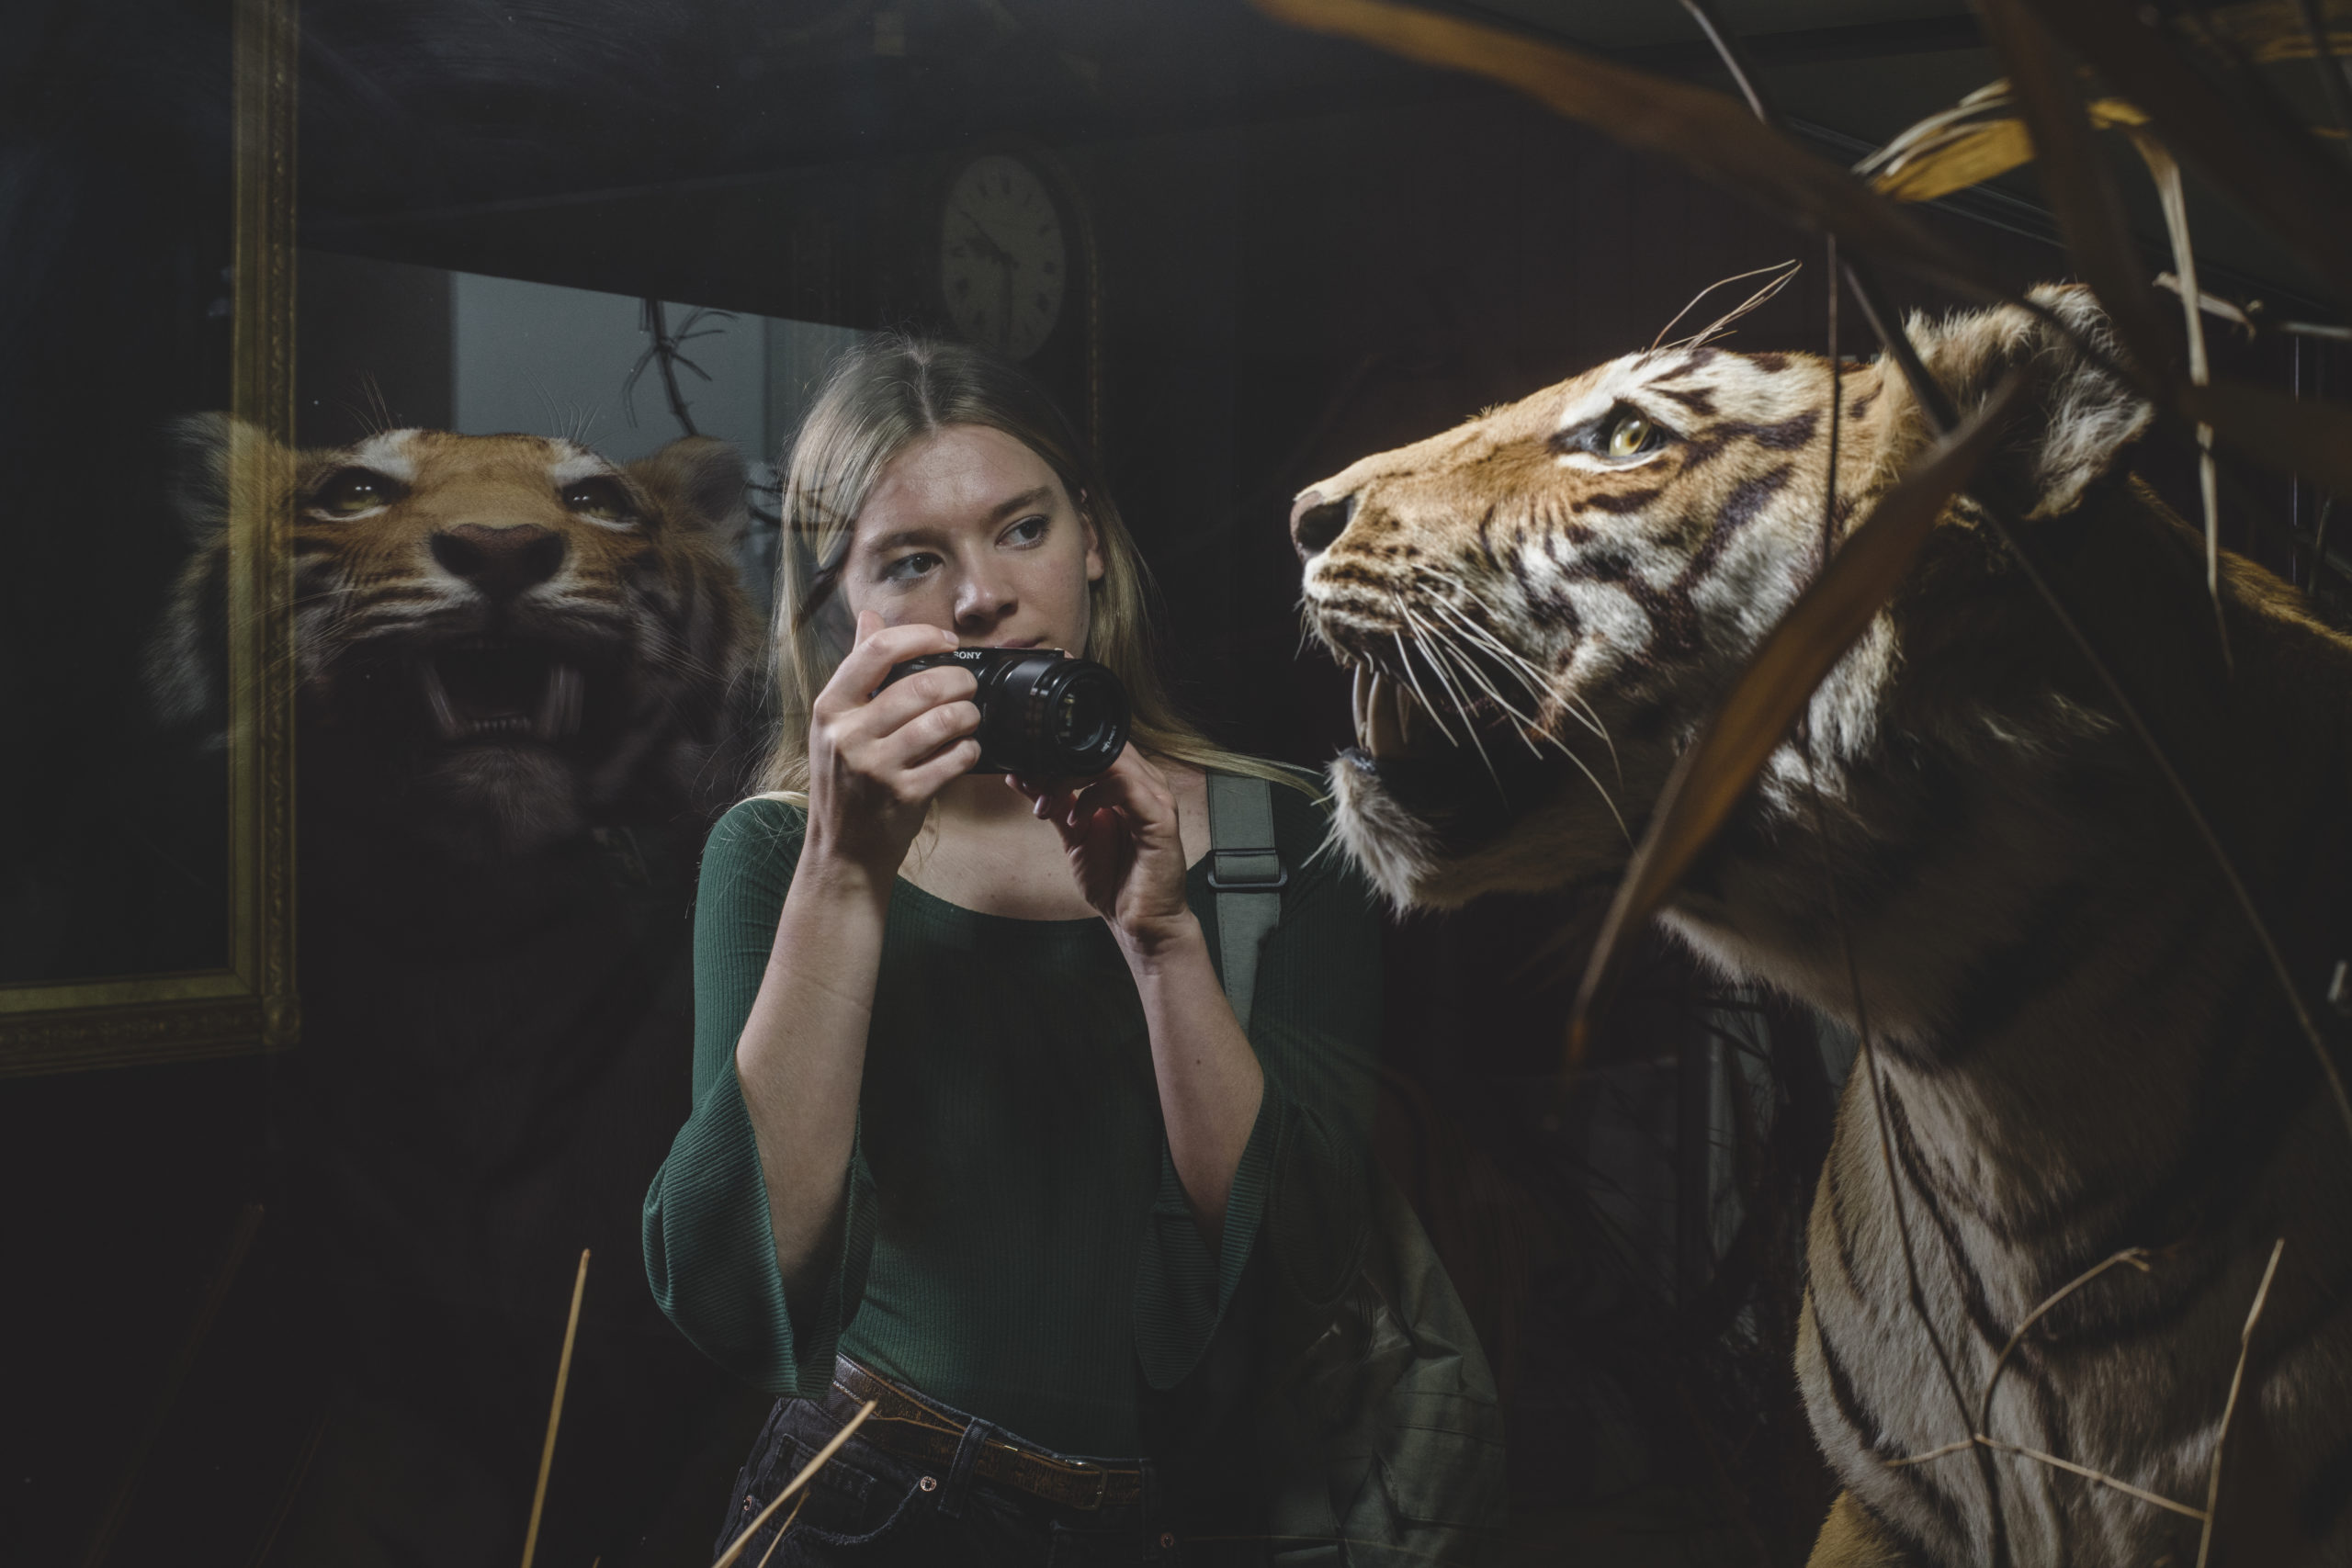 Woman taking a photograph of the tiger from the RAMM's collection